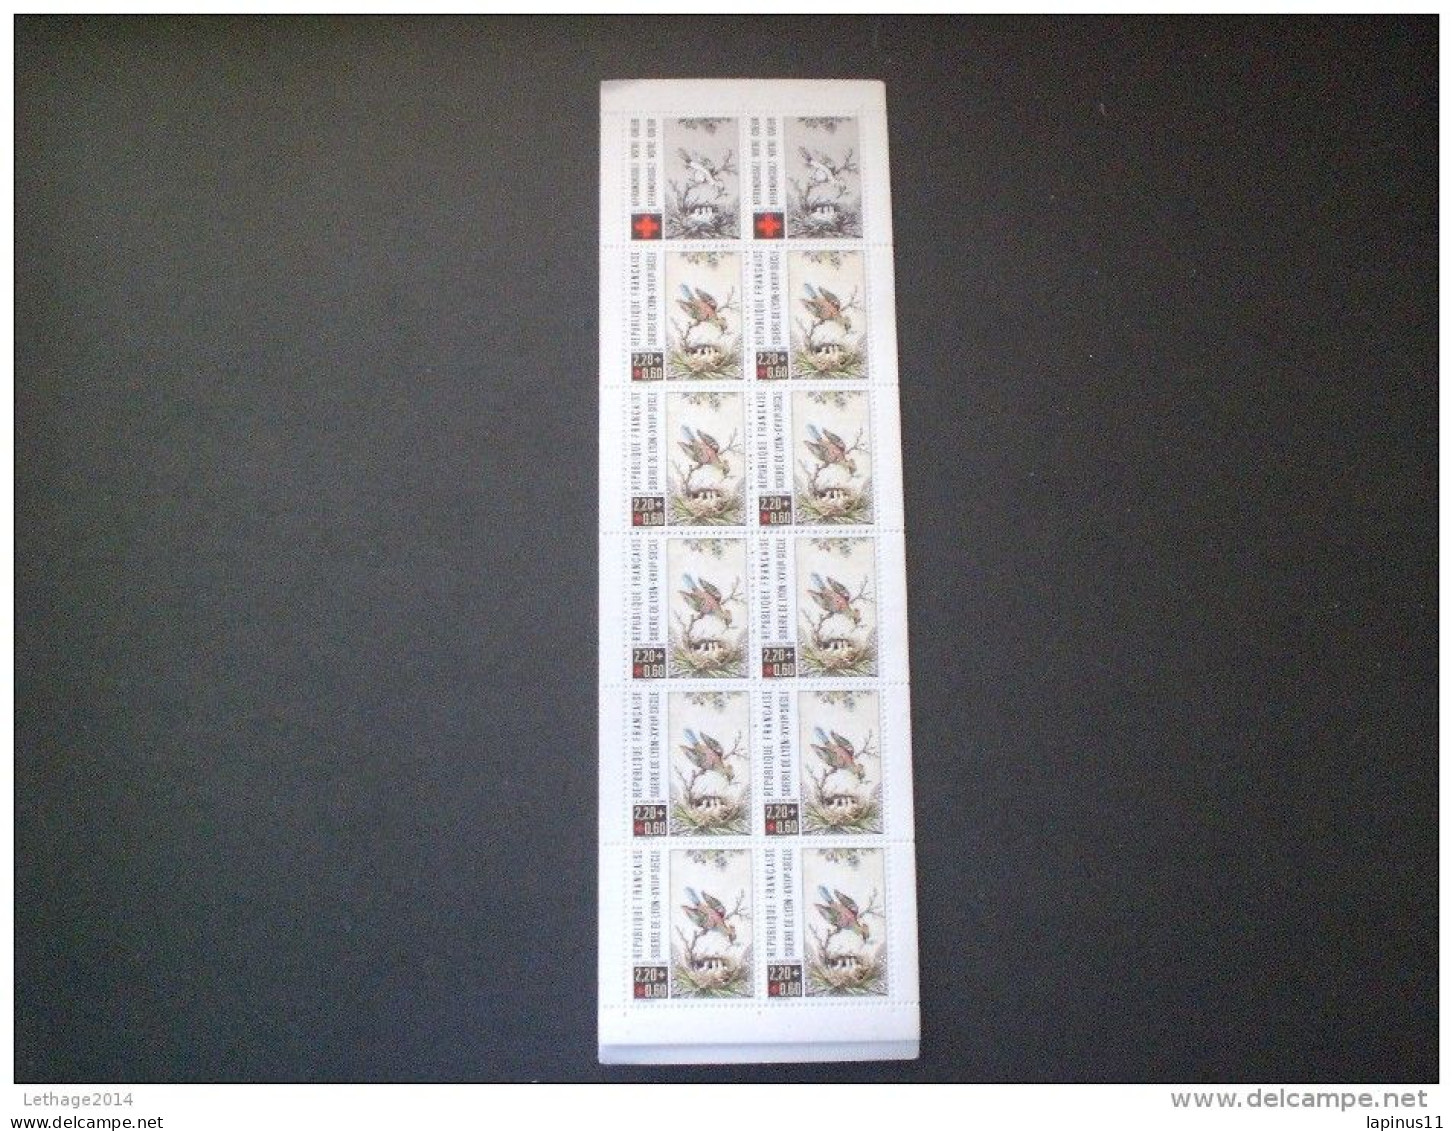 STAMPS FRANCE CARNETS 1985 RED CROSS - Personajes